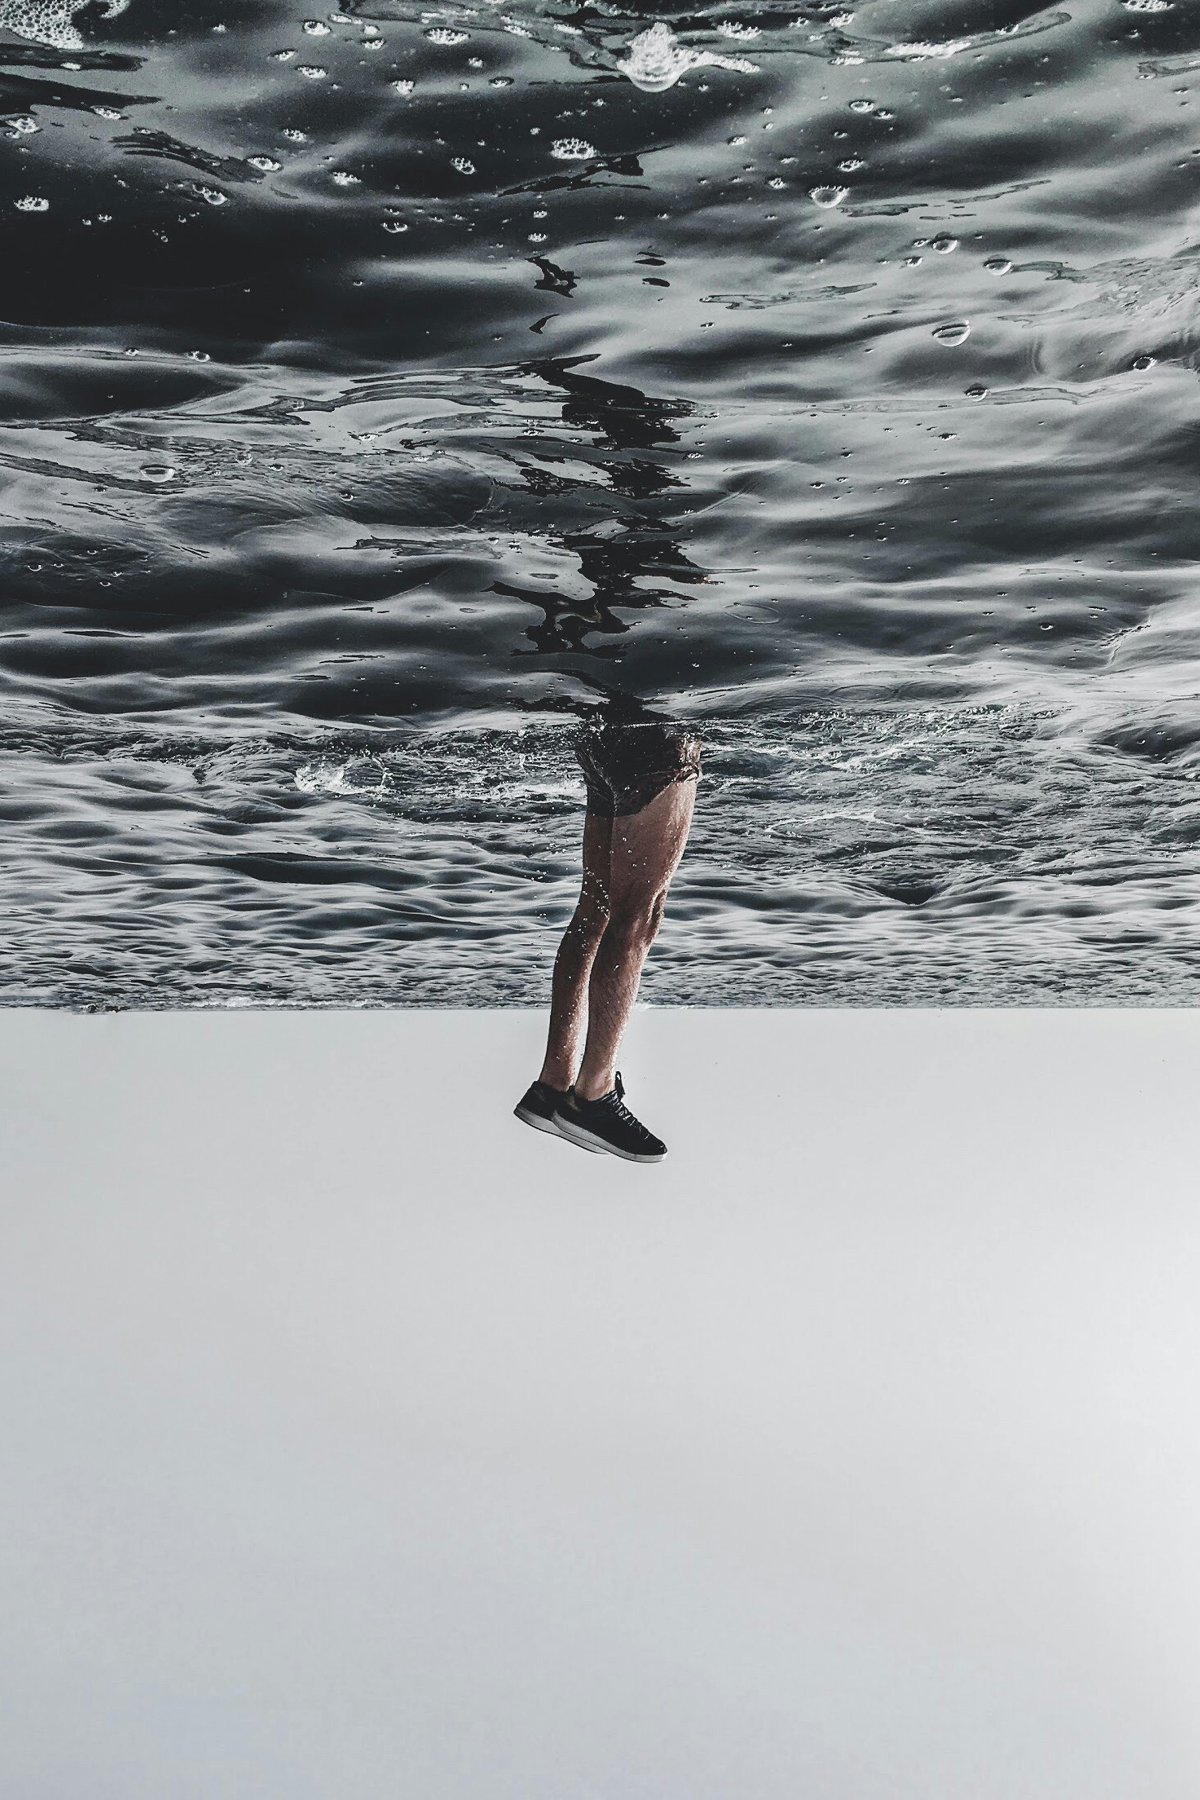 a surreal scene with water surface in the upper part and a person's body suspended upside down in the lower part